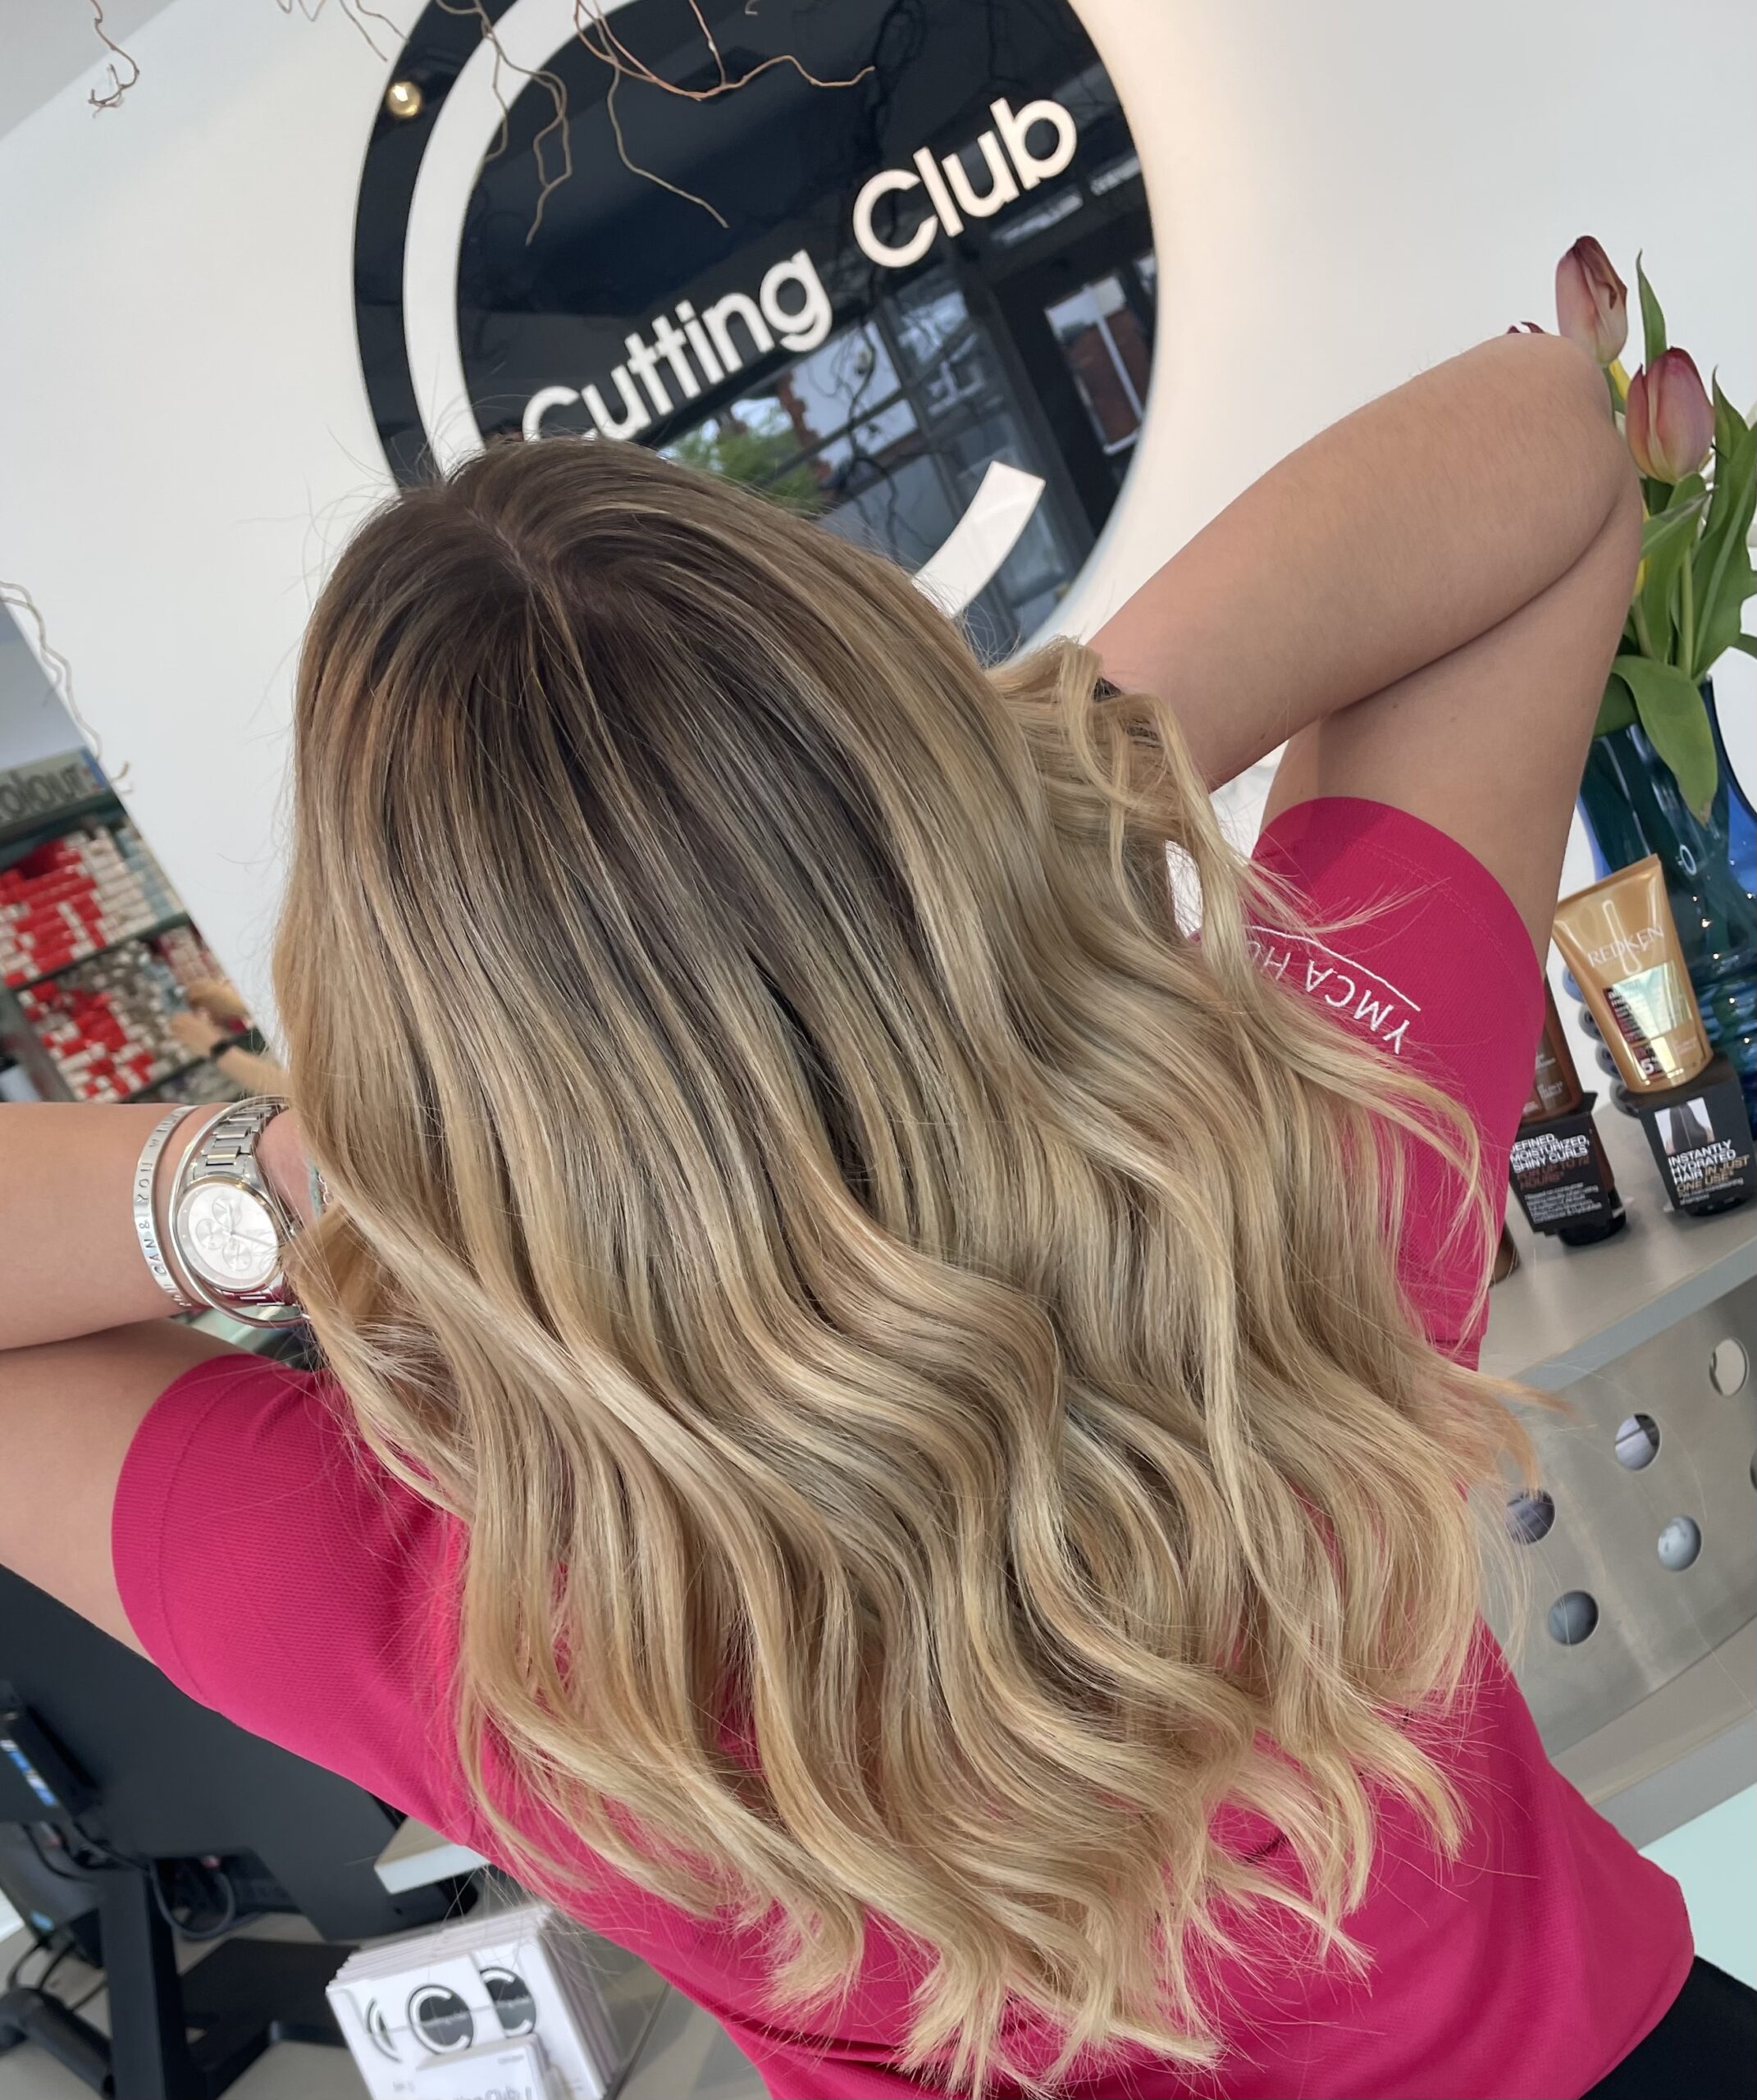 Related Posts: Looking after your Balayage />